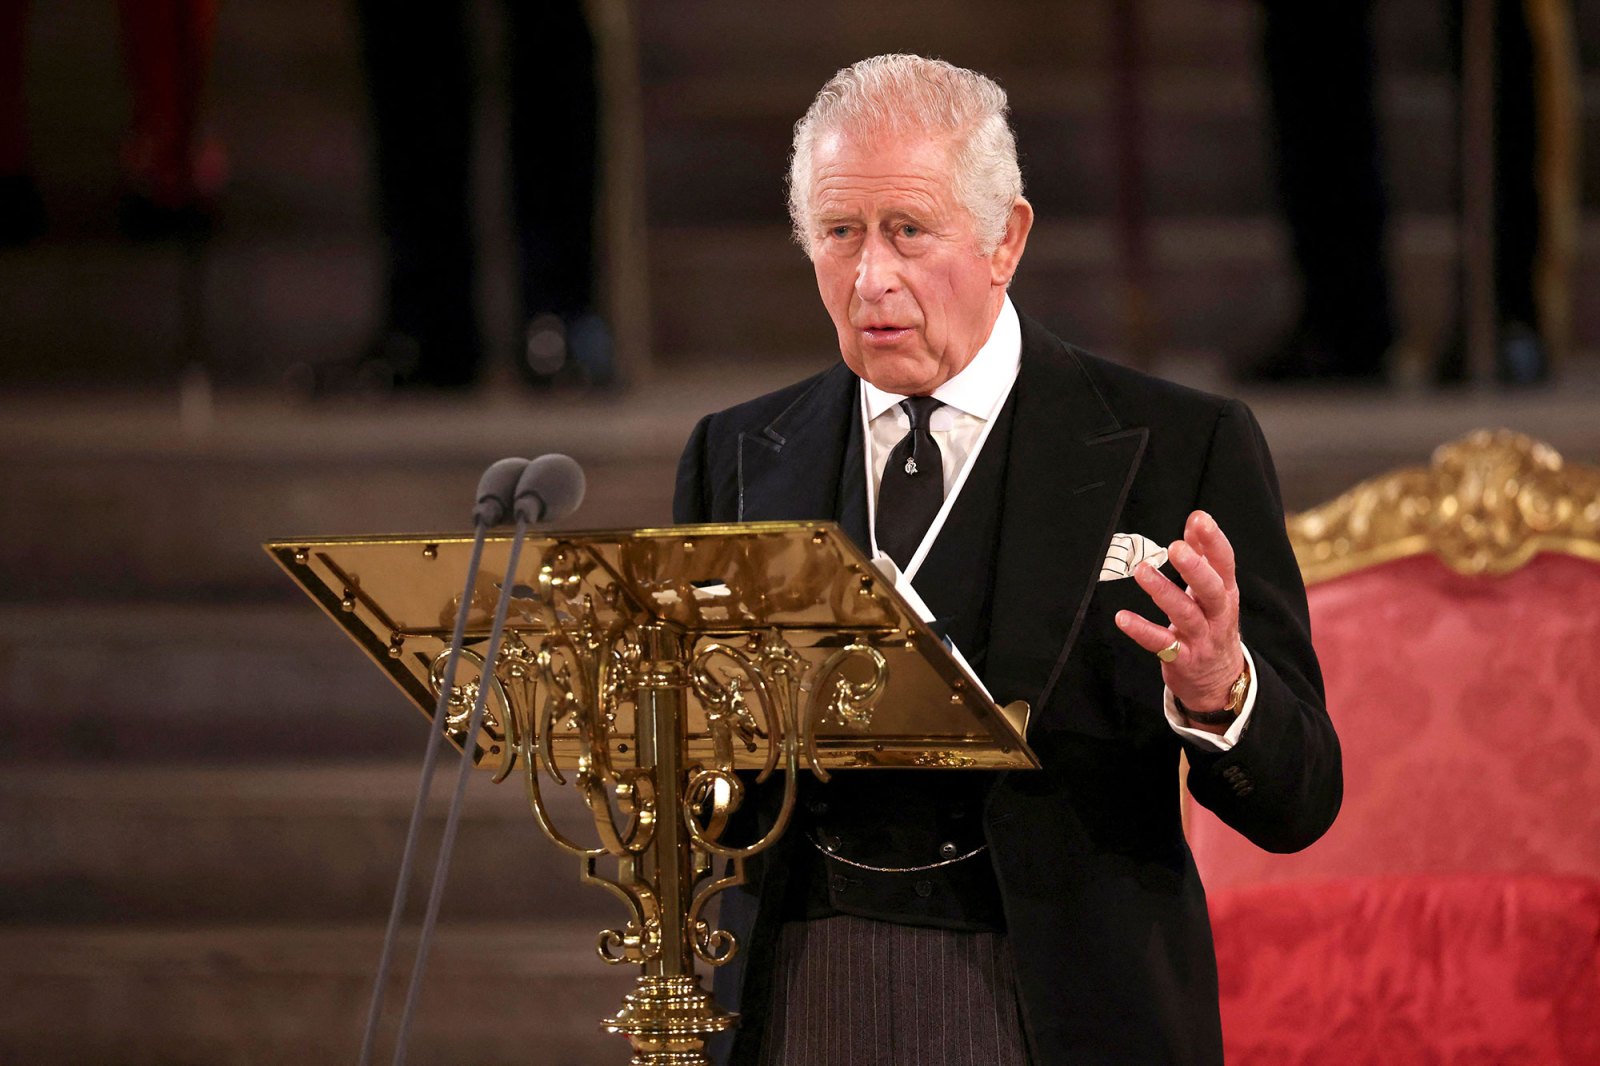 King Charles III and Camilla Queen Consort Sit on the Throne for the 1st Time During Parliament Address 3